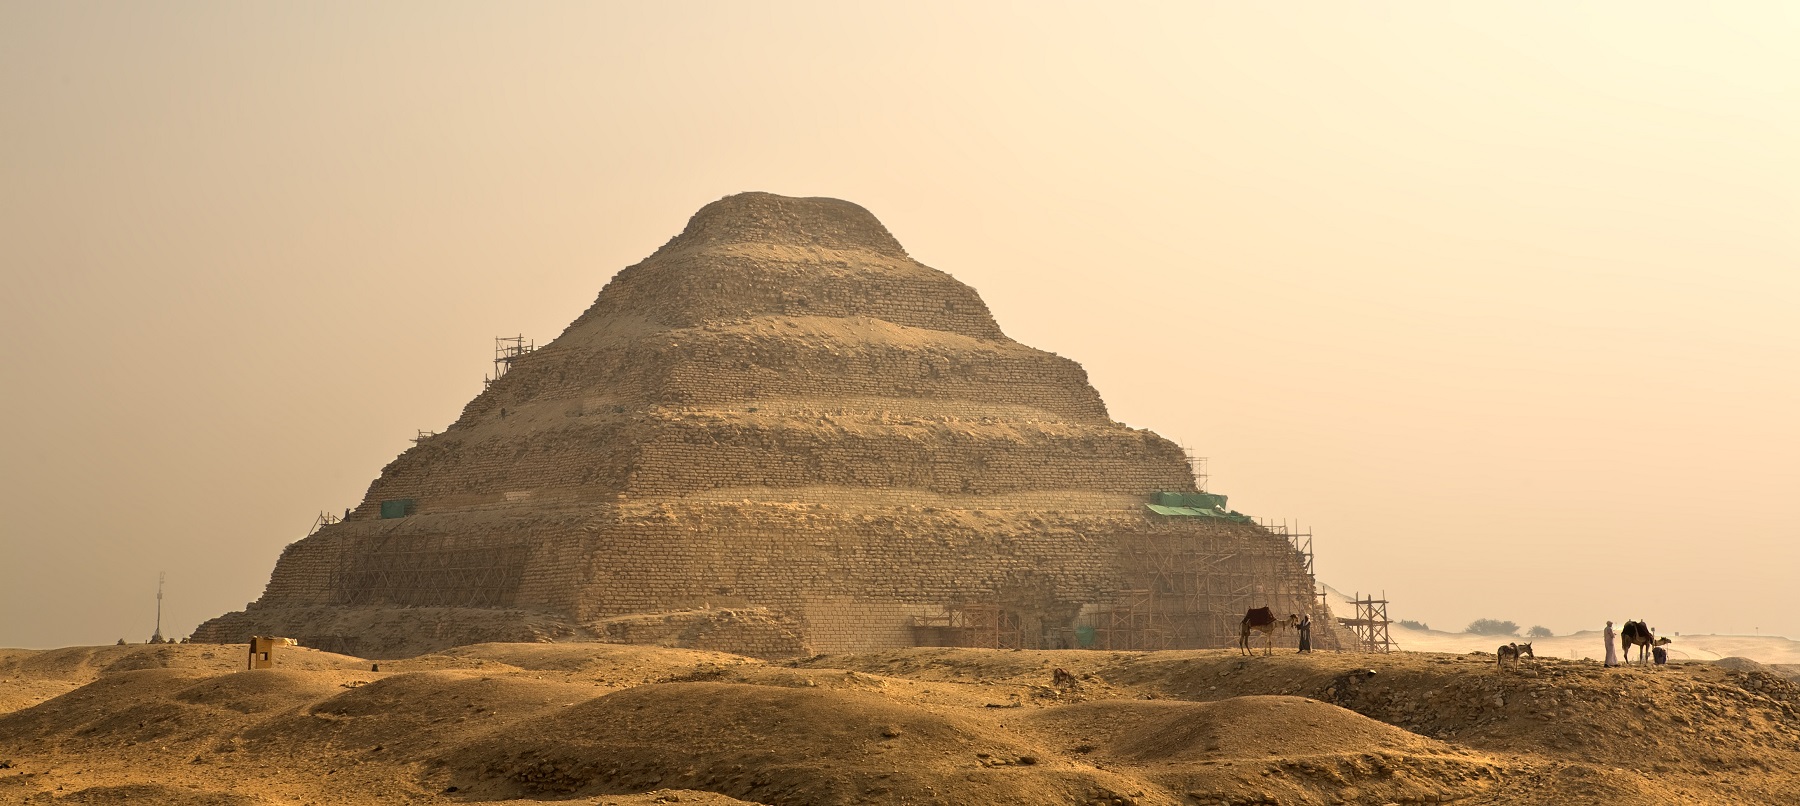 A view of Djoser's Step Pyramid. Shutterstock.